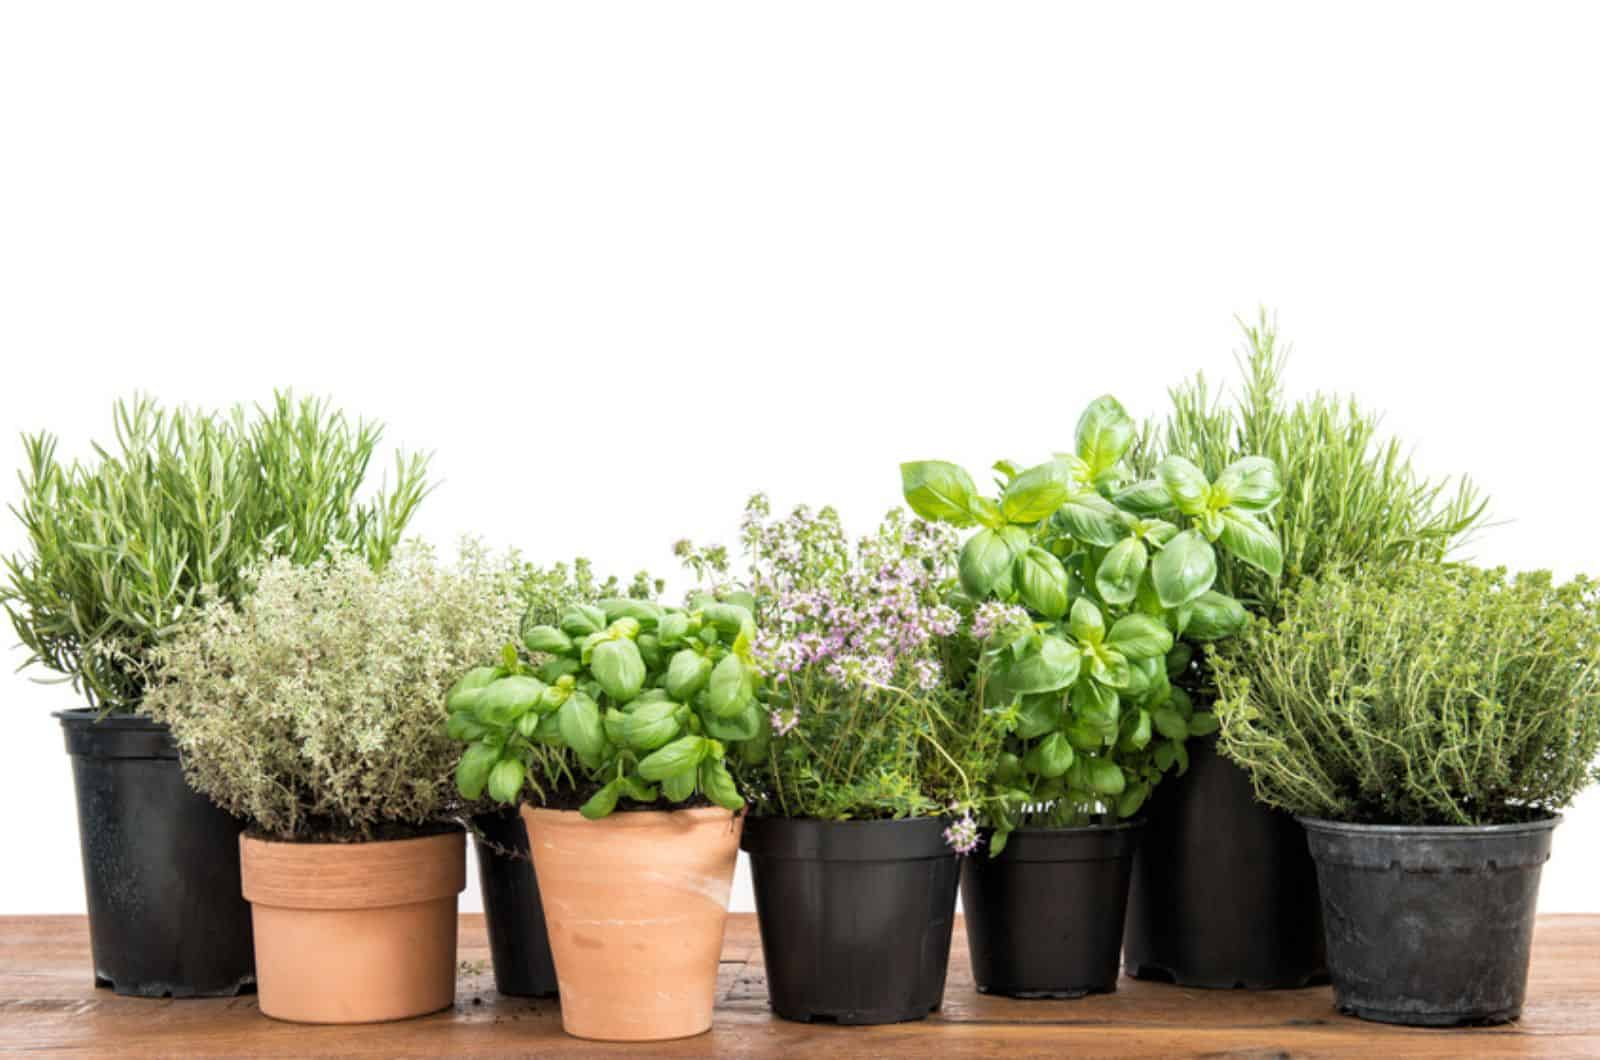 Growing Herbs In Pots For Beginners: Step-by-step Guide